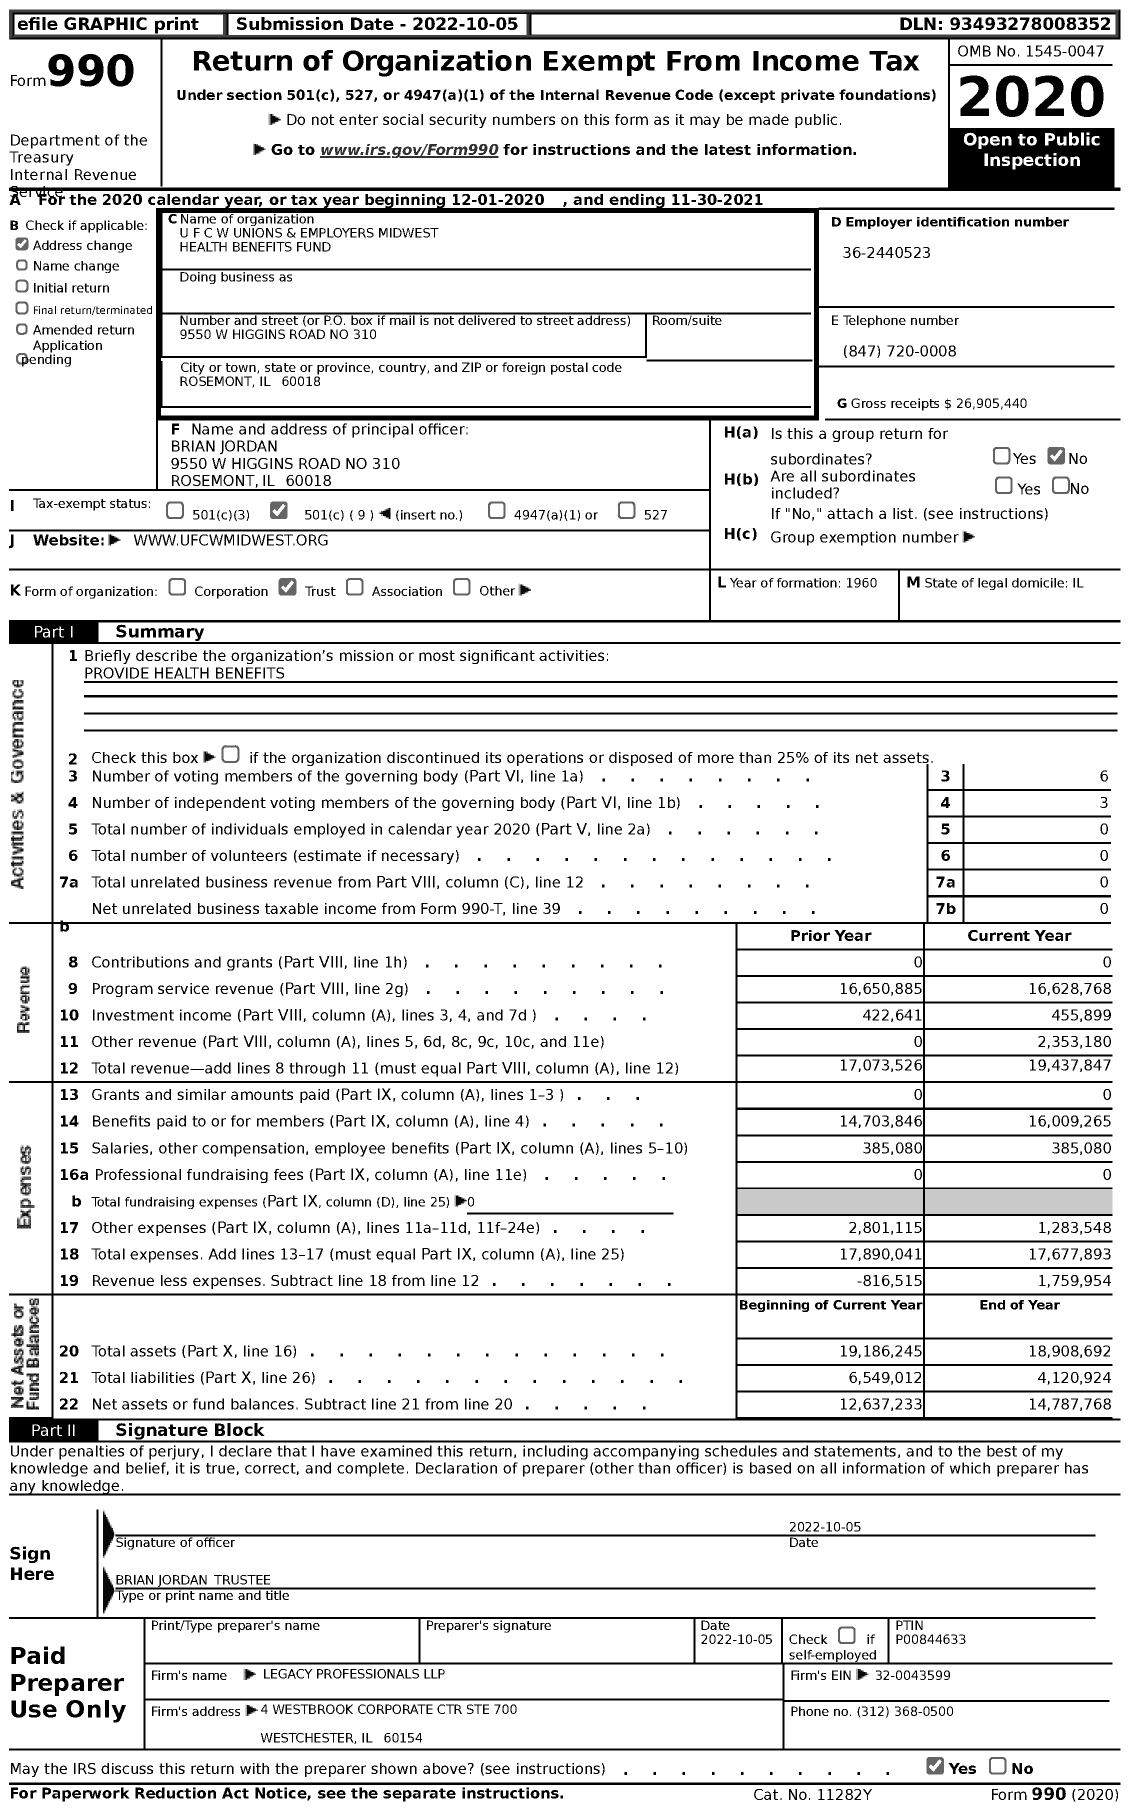 Image of first page of 2020 Form 990 for U F C W Unions and Employers Midwest Health Benefits Fund